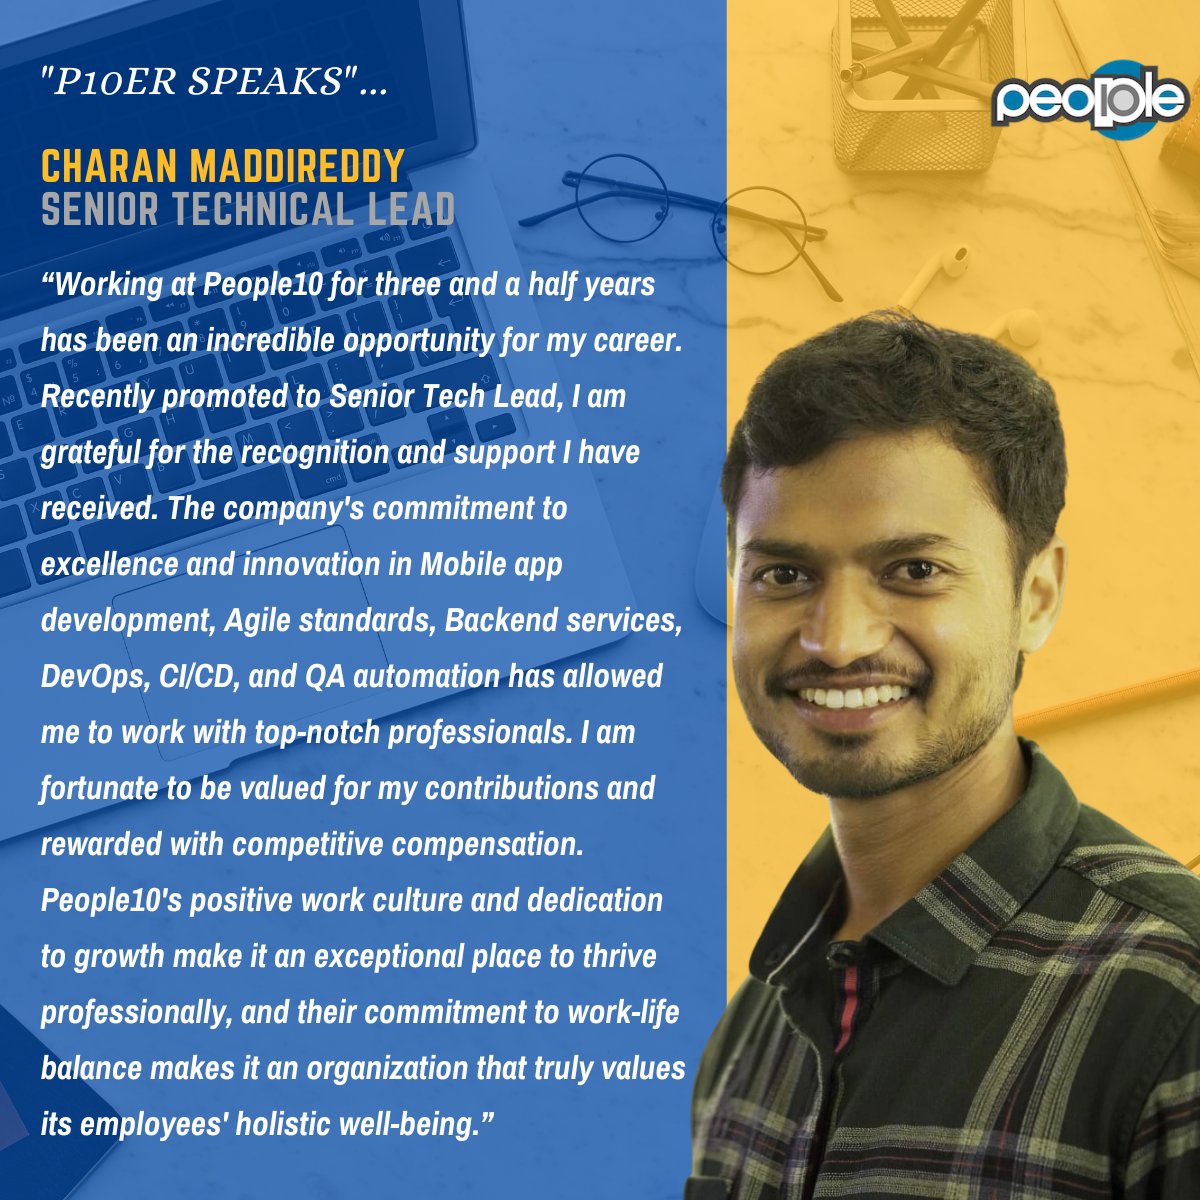 Thank you for sharing your thoughts Charan Maddireddy!
#p10erspeaks #thankyou #people10testimonials #careergrowth #recognition #innovation #learninganddevelopment #learningandgrowing #learningjourney #mobileappdevelopment #agile #backend #devops #qaautomation #careerintech